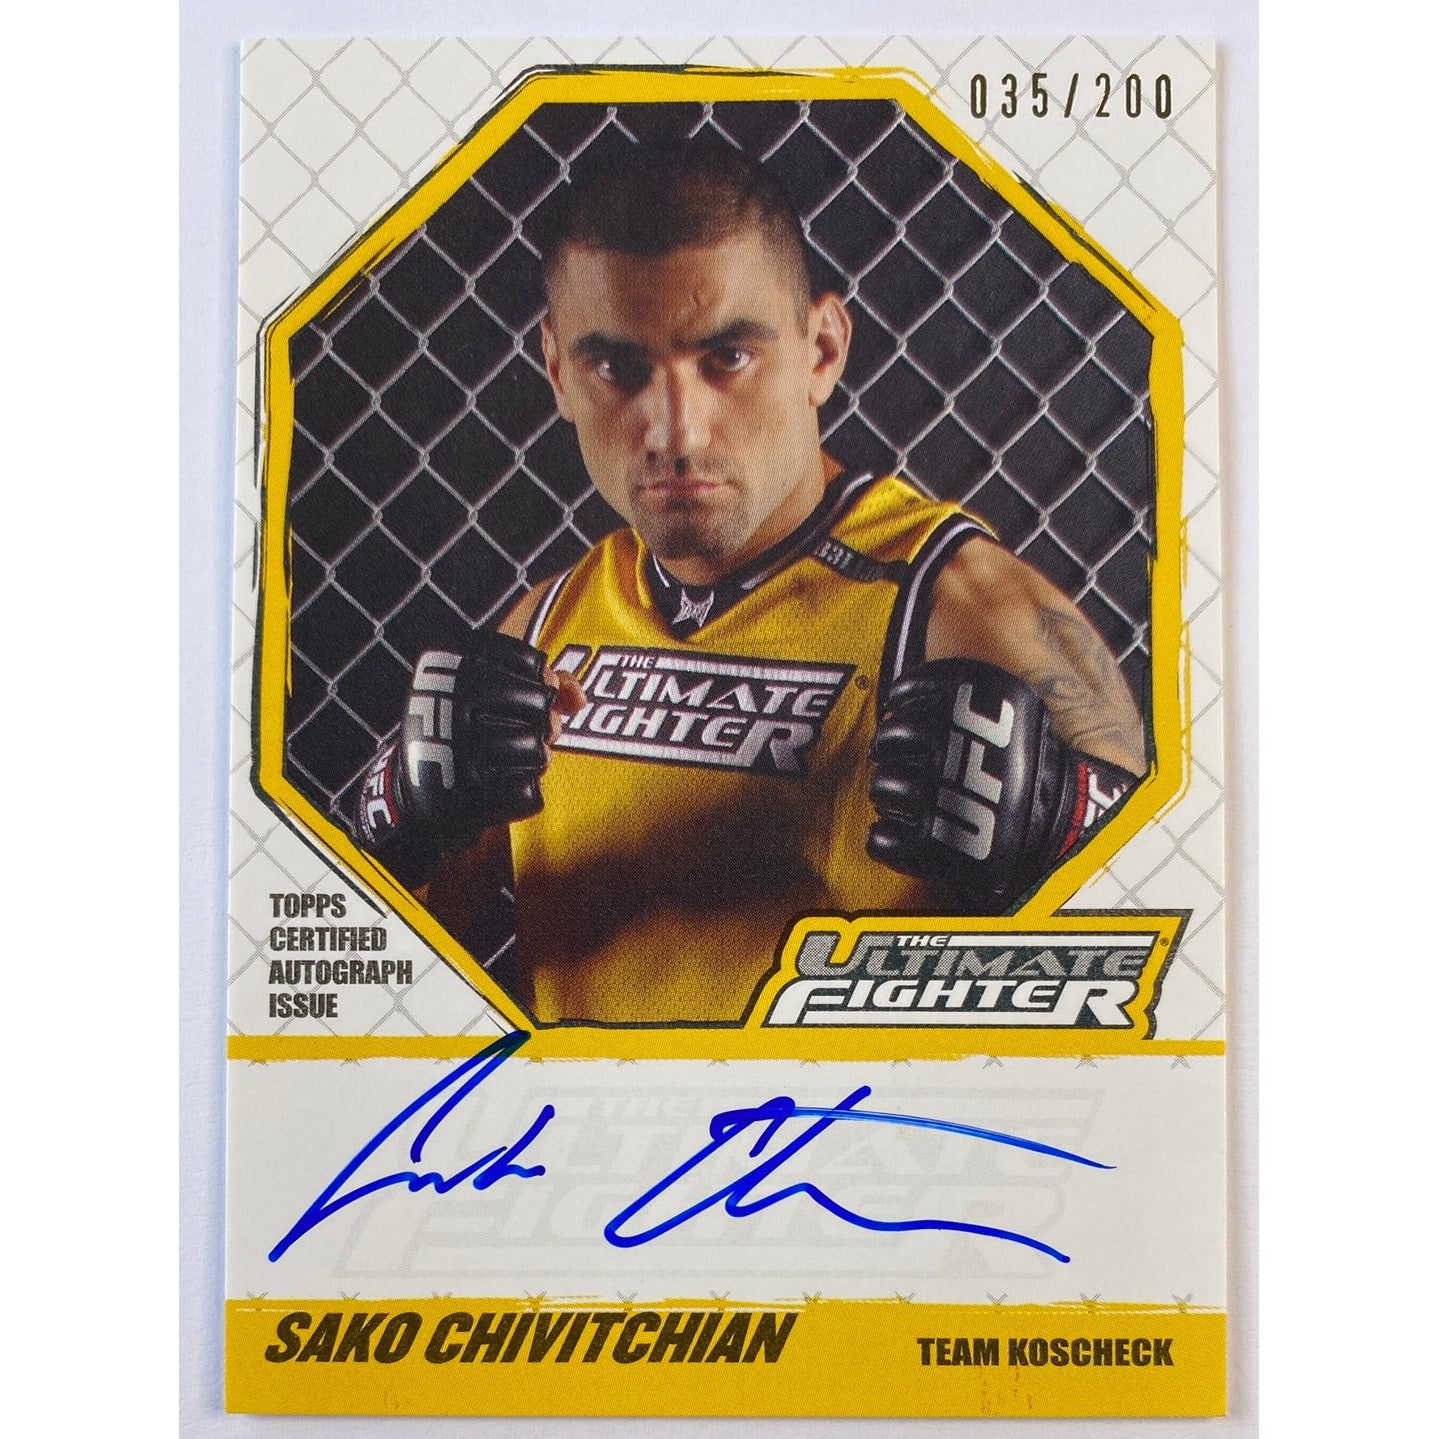 2010 Topps Sako Chivitchian Ultimate Fighter RC Auto /200